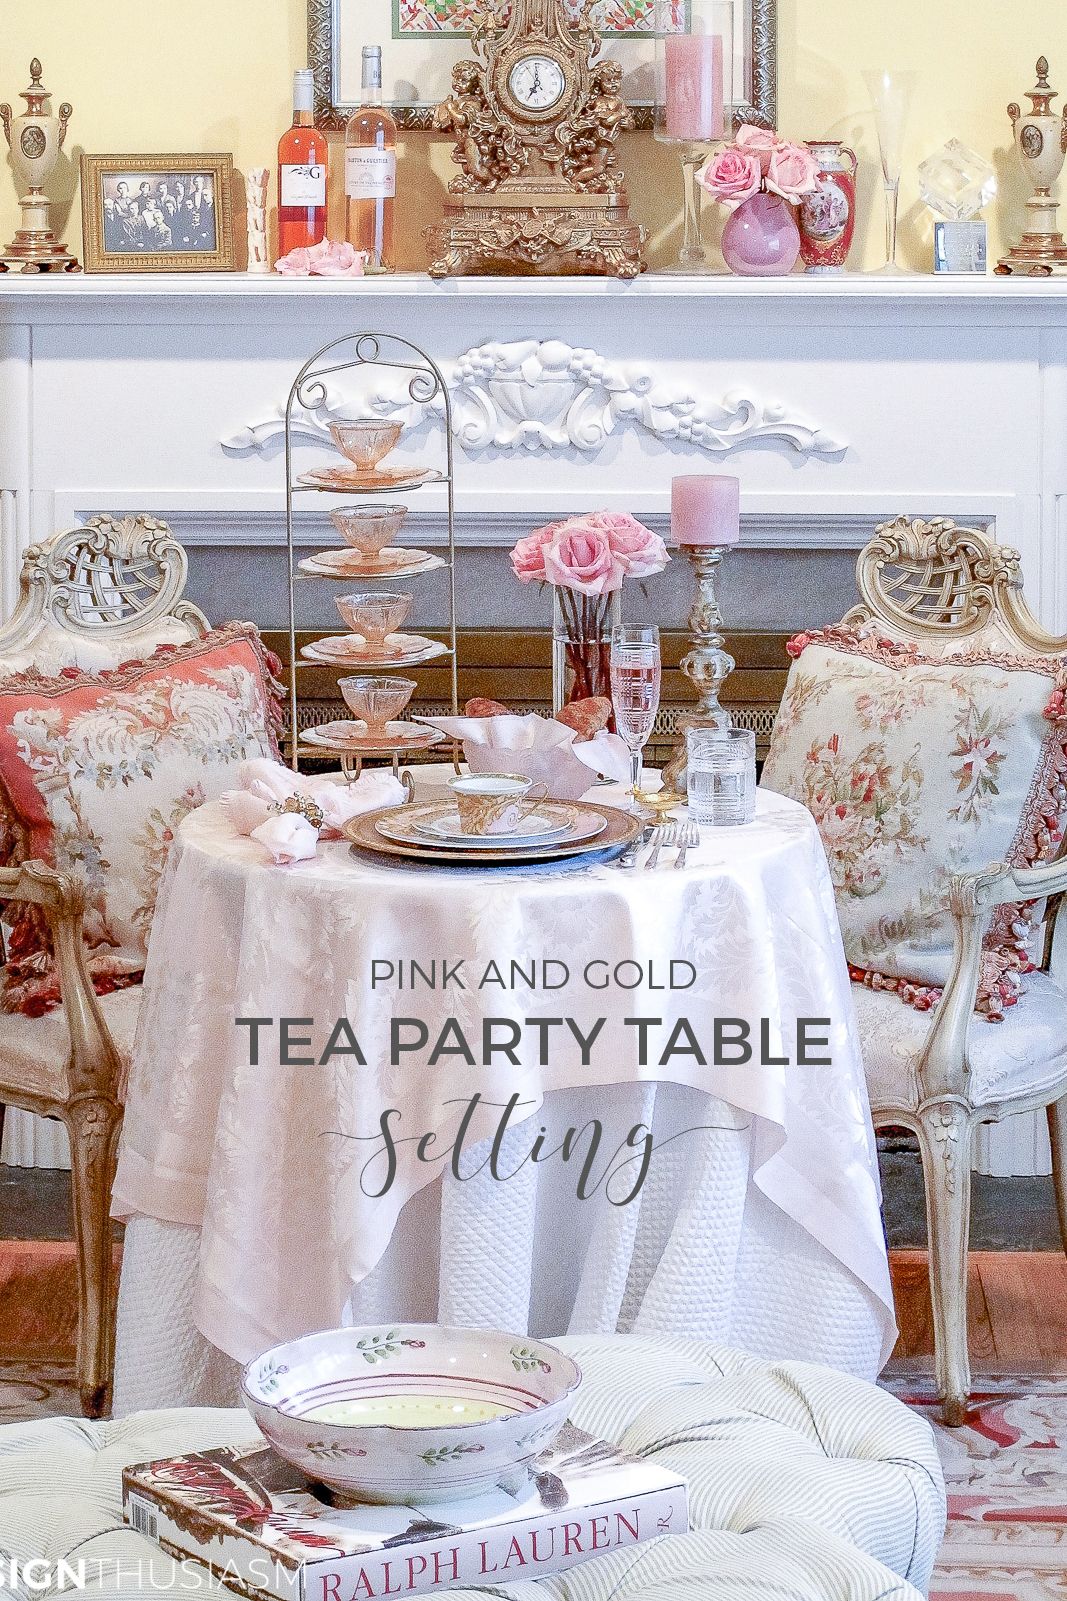 Tea Party Table Setting: Pink and Gold Versace Plates